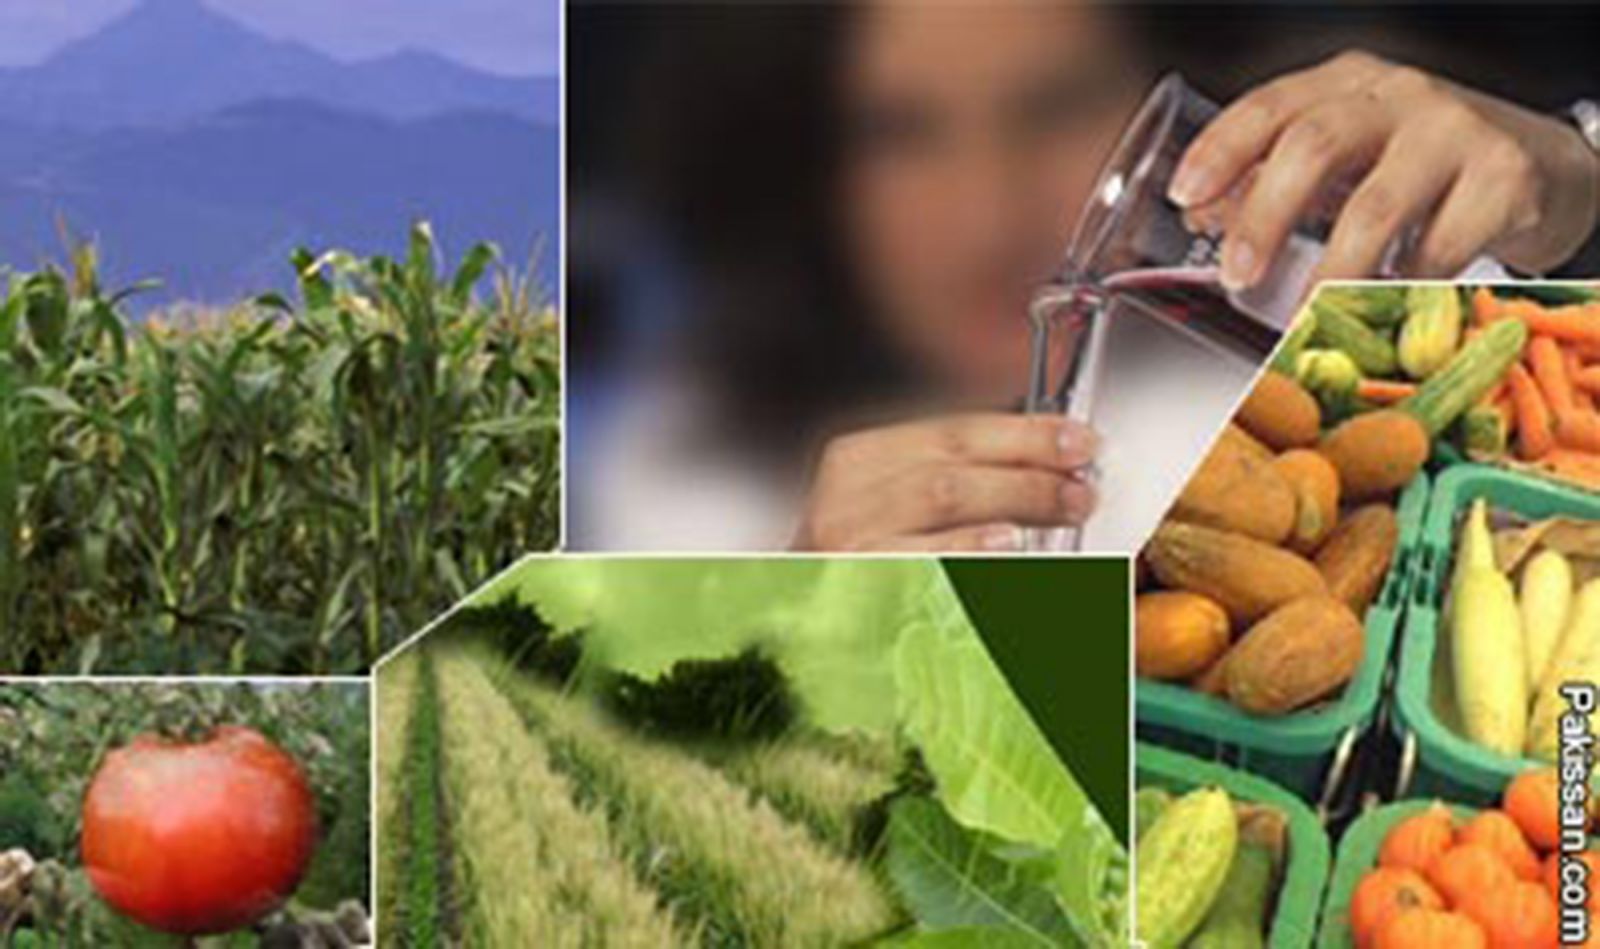 importance of biotechnology in agriculture